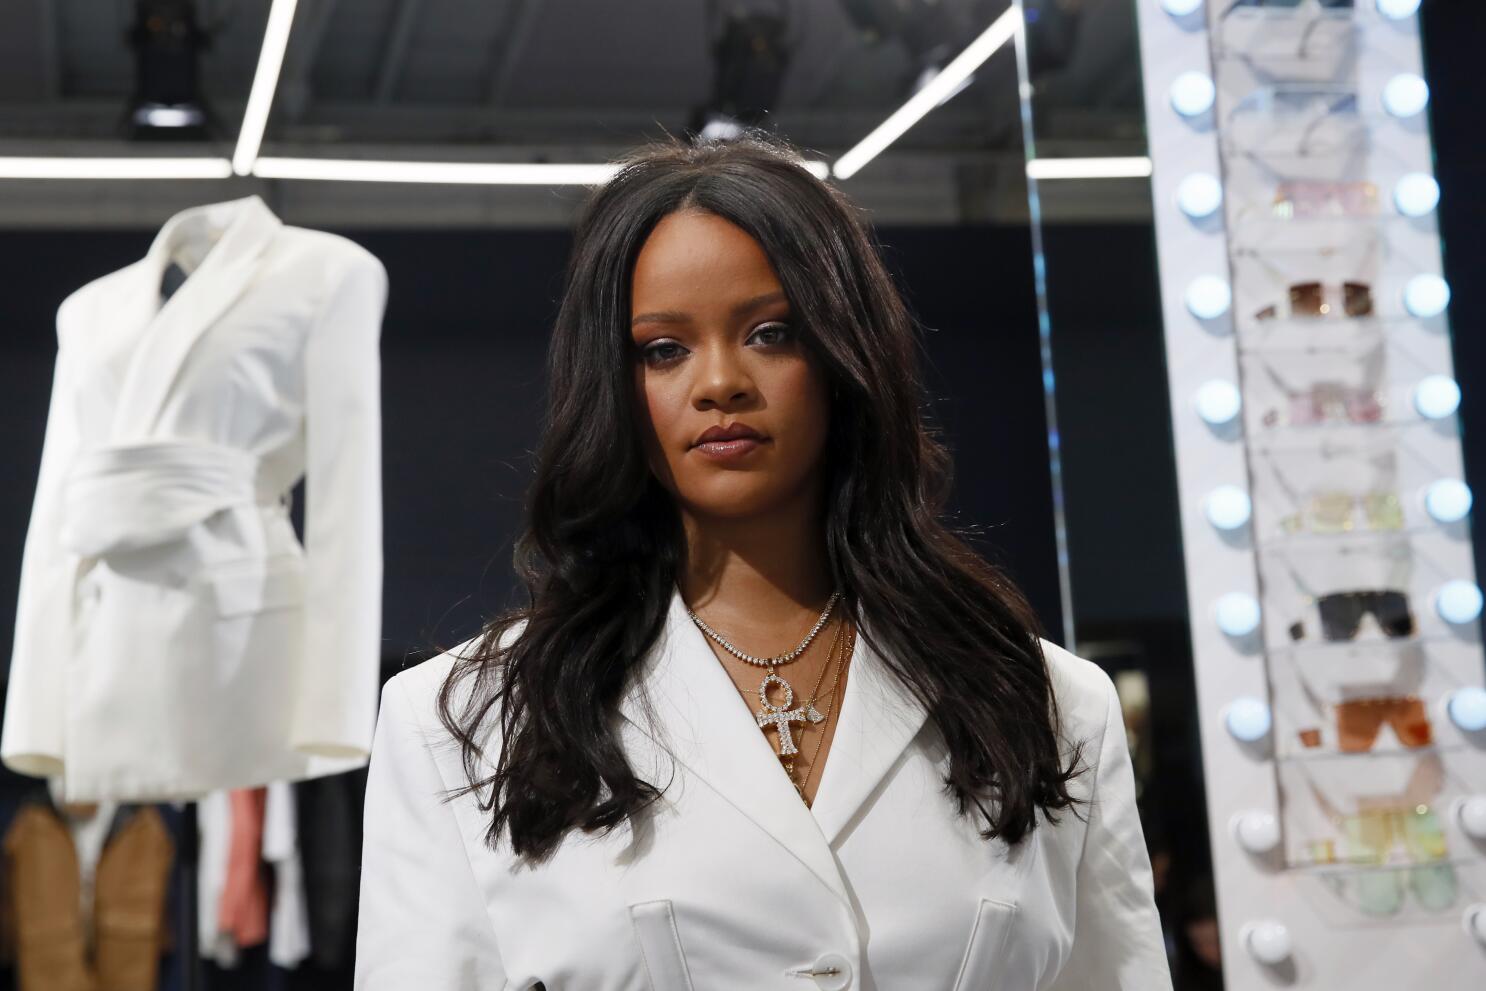 Here's What We Know About Rihanna's New Fashion Line, Which Just